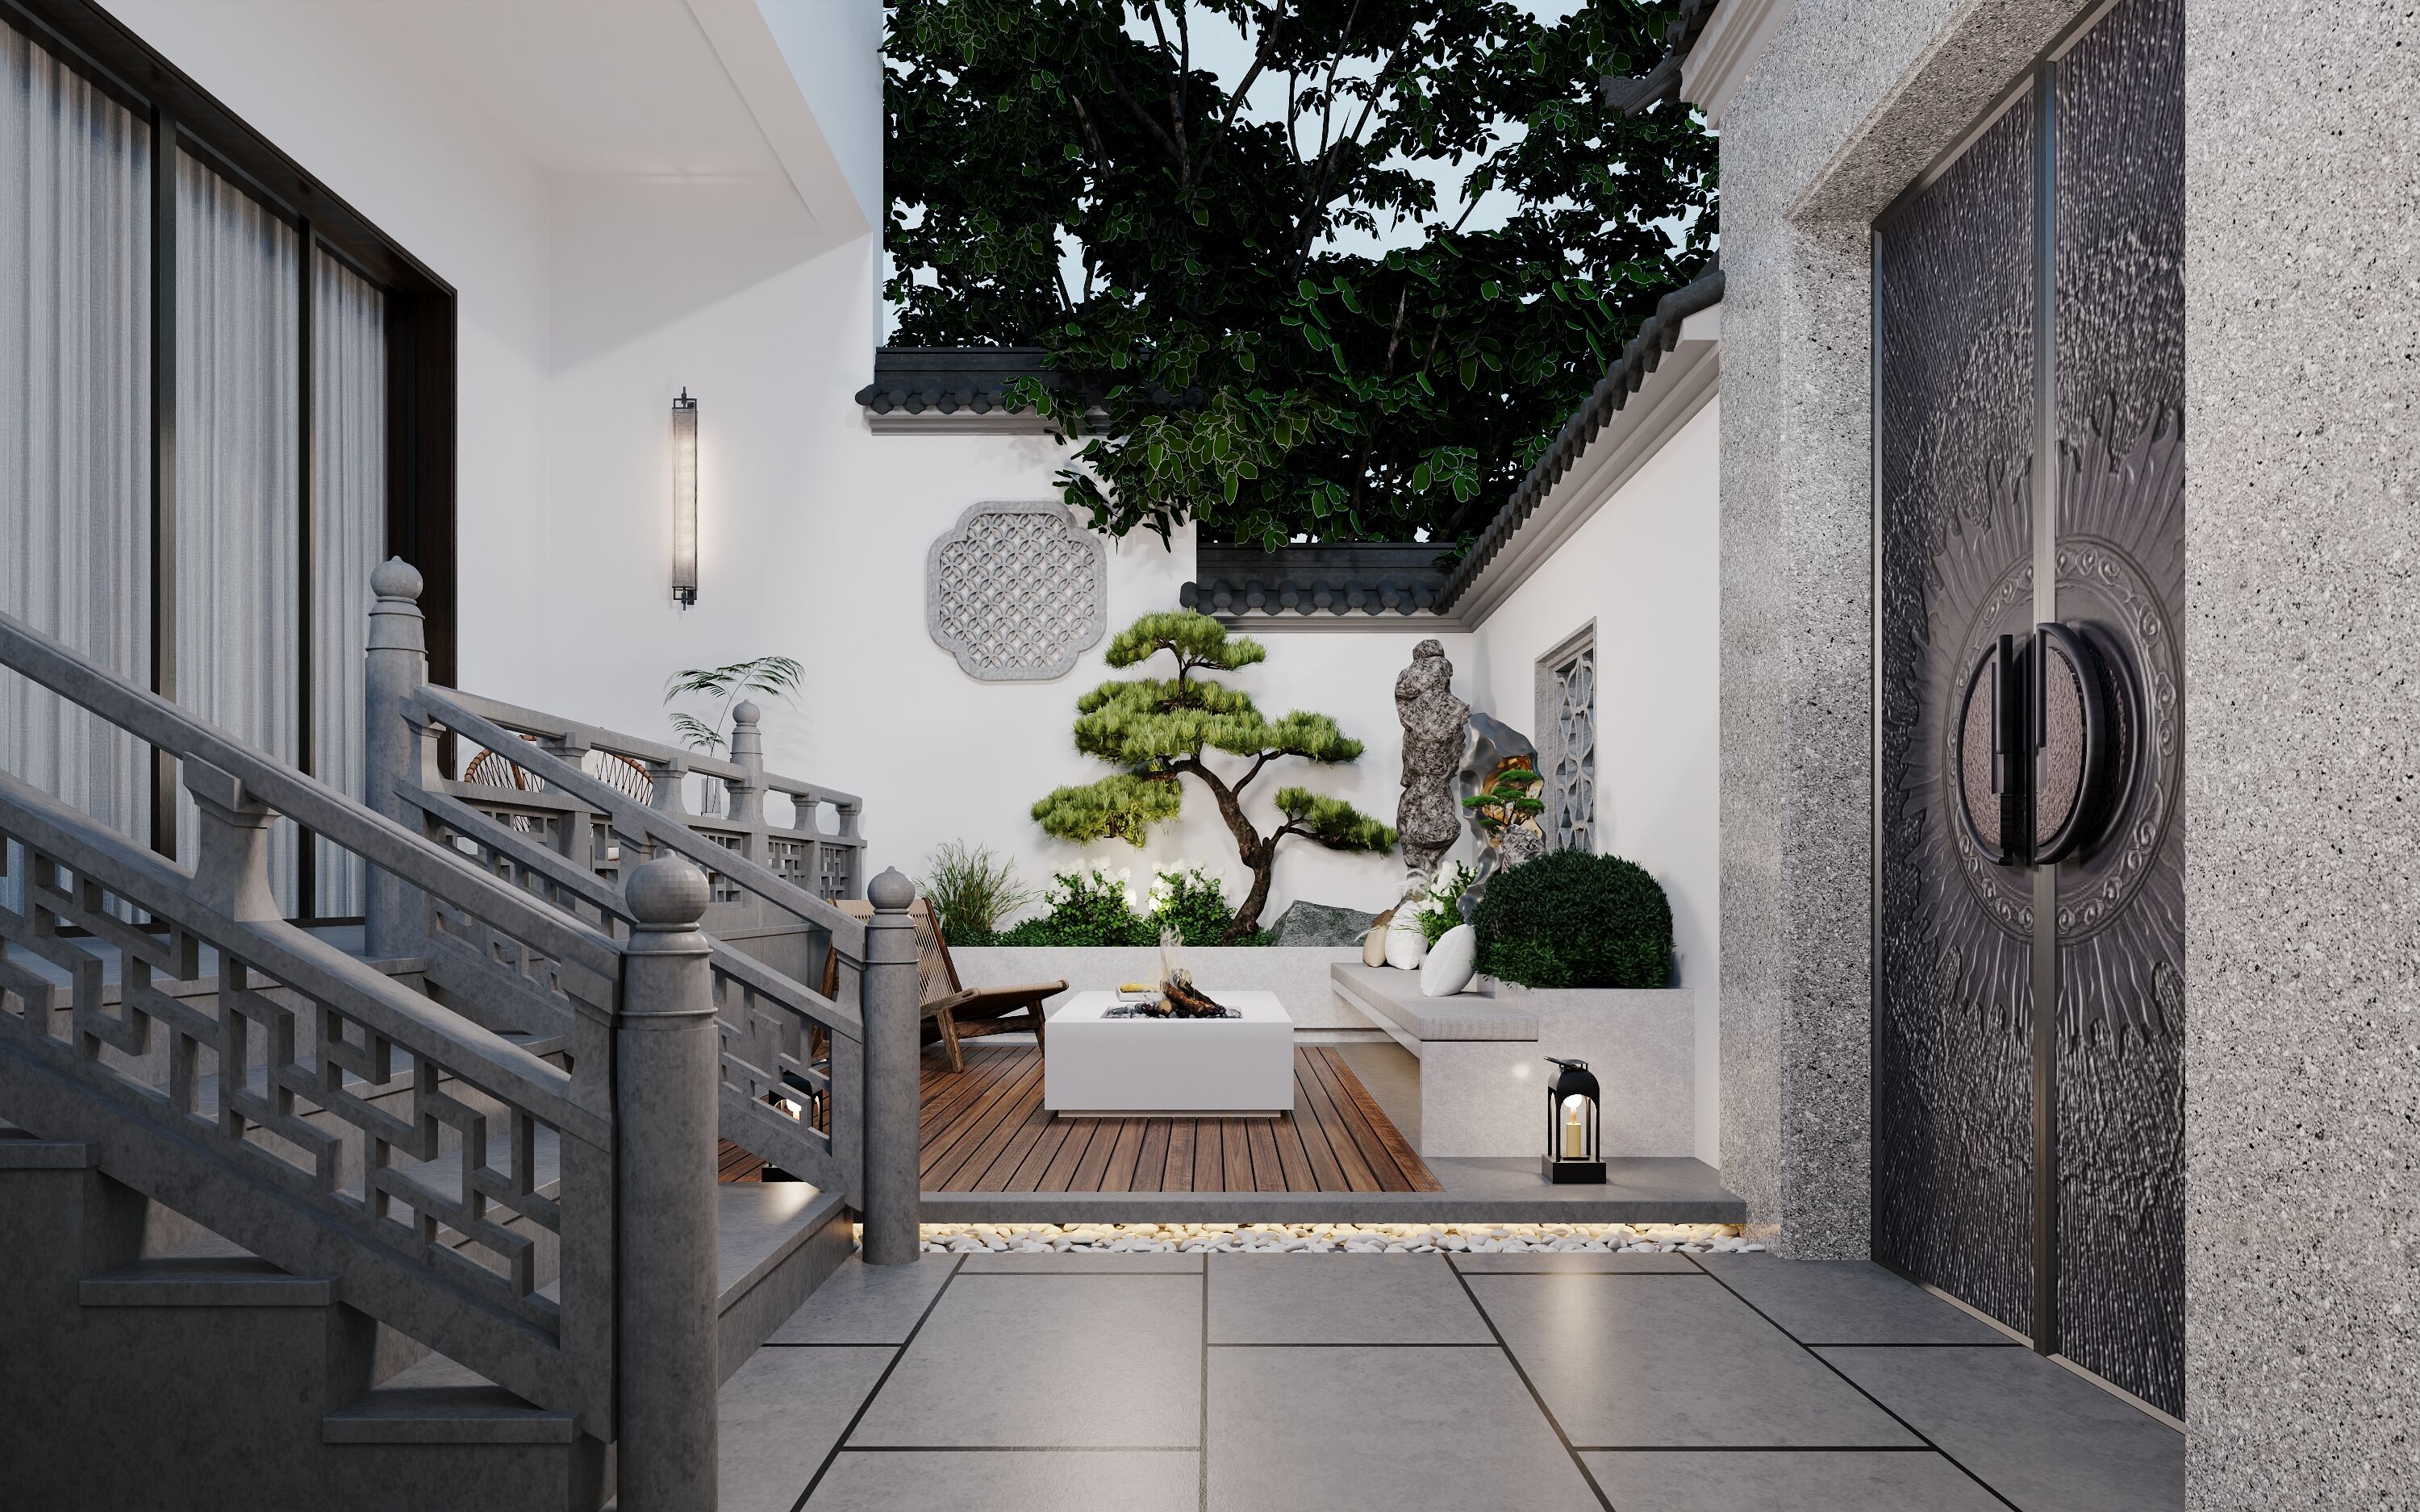  Project location: Lantingyuan (townhouse) Project area: 240 ㎡+33 ㎡ Courtyard Project style: new Chinese style Project nature: villa decoration Project status: each set of works under construction is customized by the private